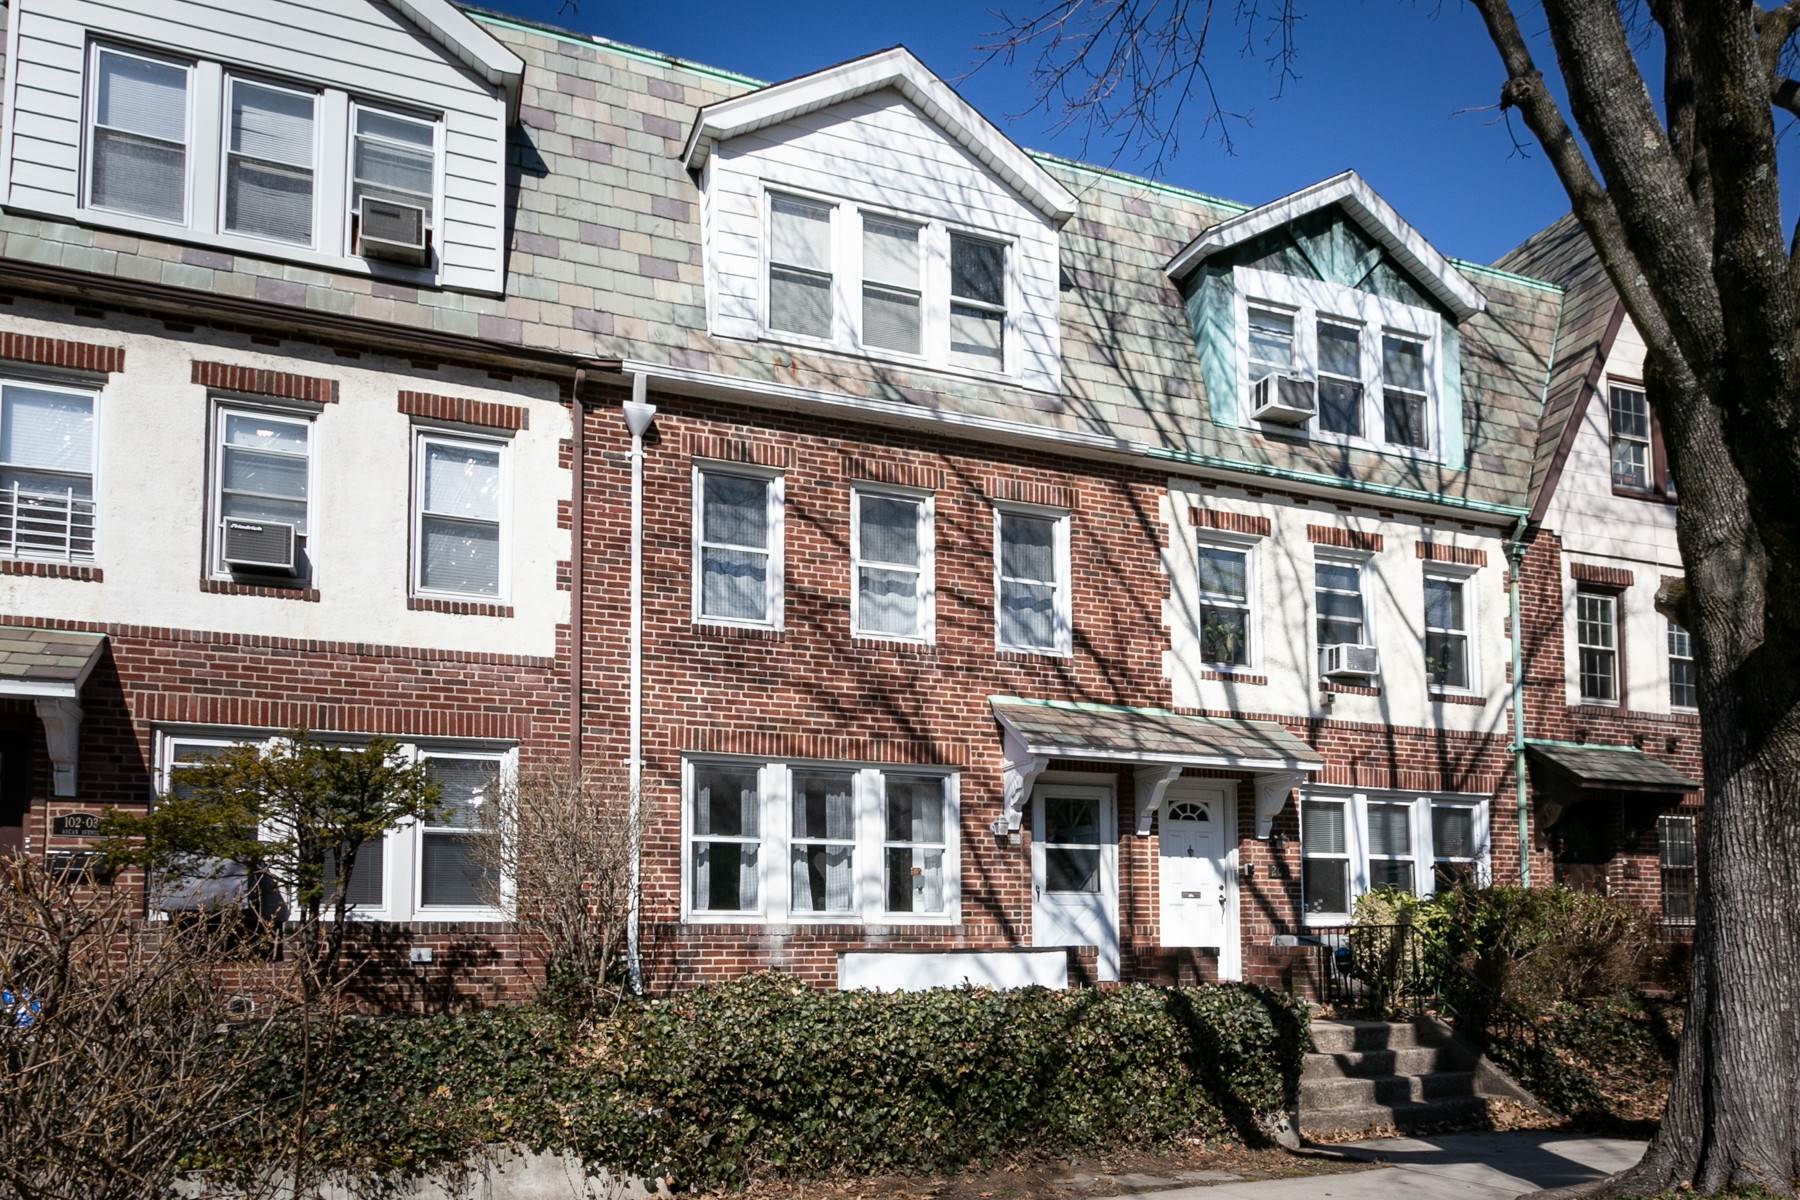 Multi-Family Homes for Sale at BRIGHT & AIRY TWO FAMILY 205 Ascan Avenue Forest Hills, New York 11375 United States